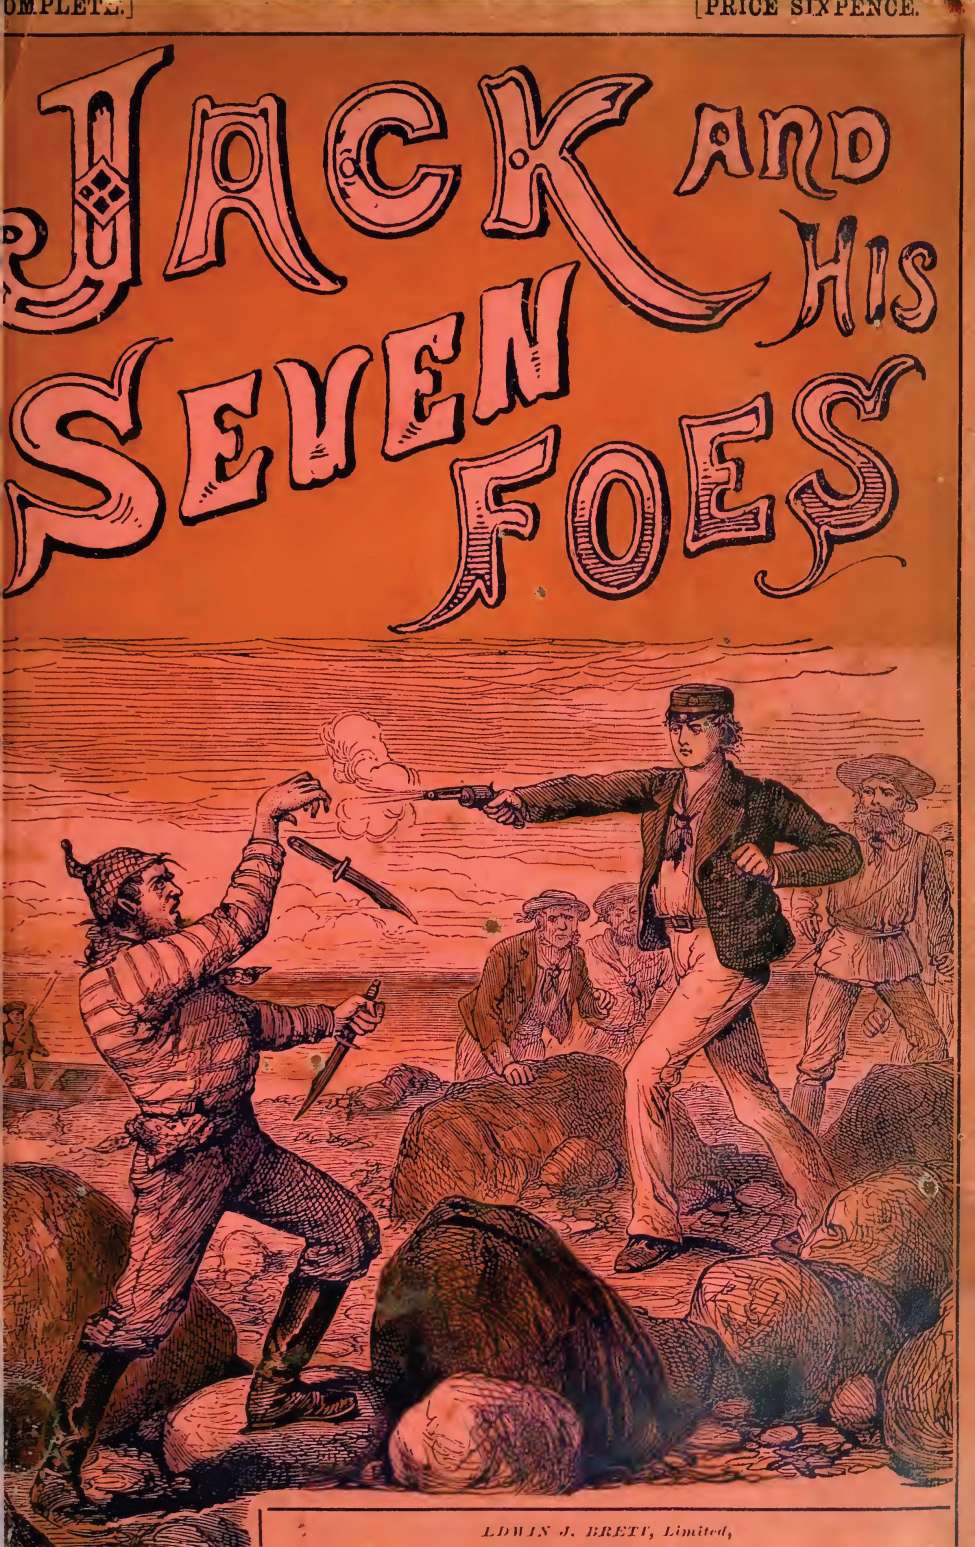 Book Cover For Jack and His Seven Foes